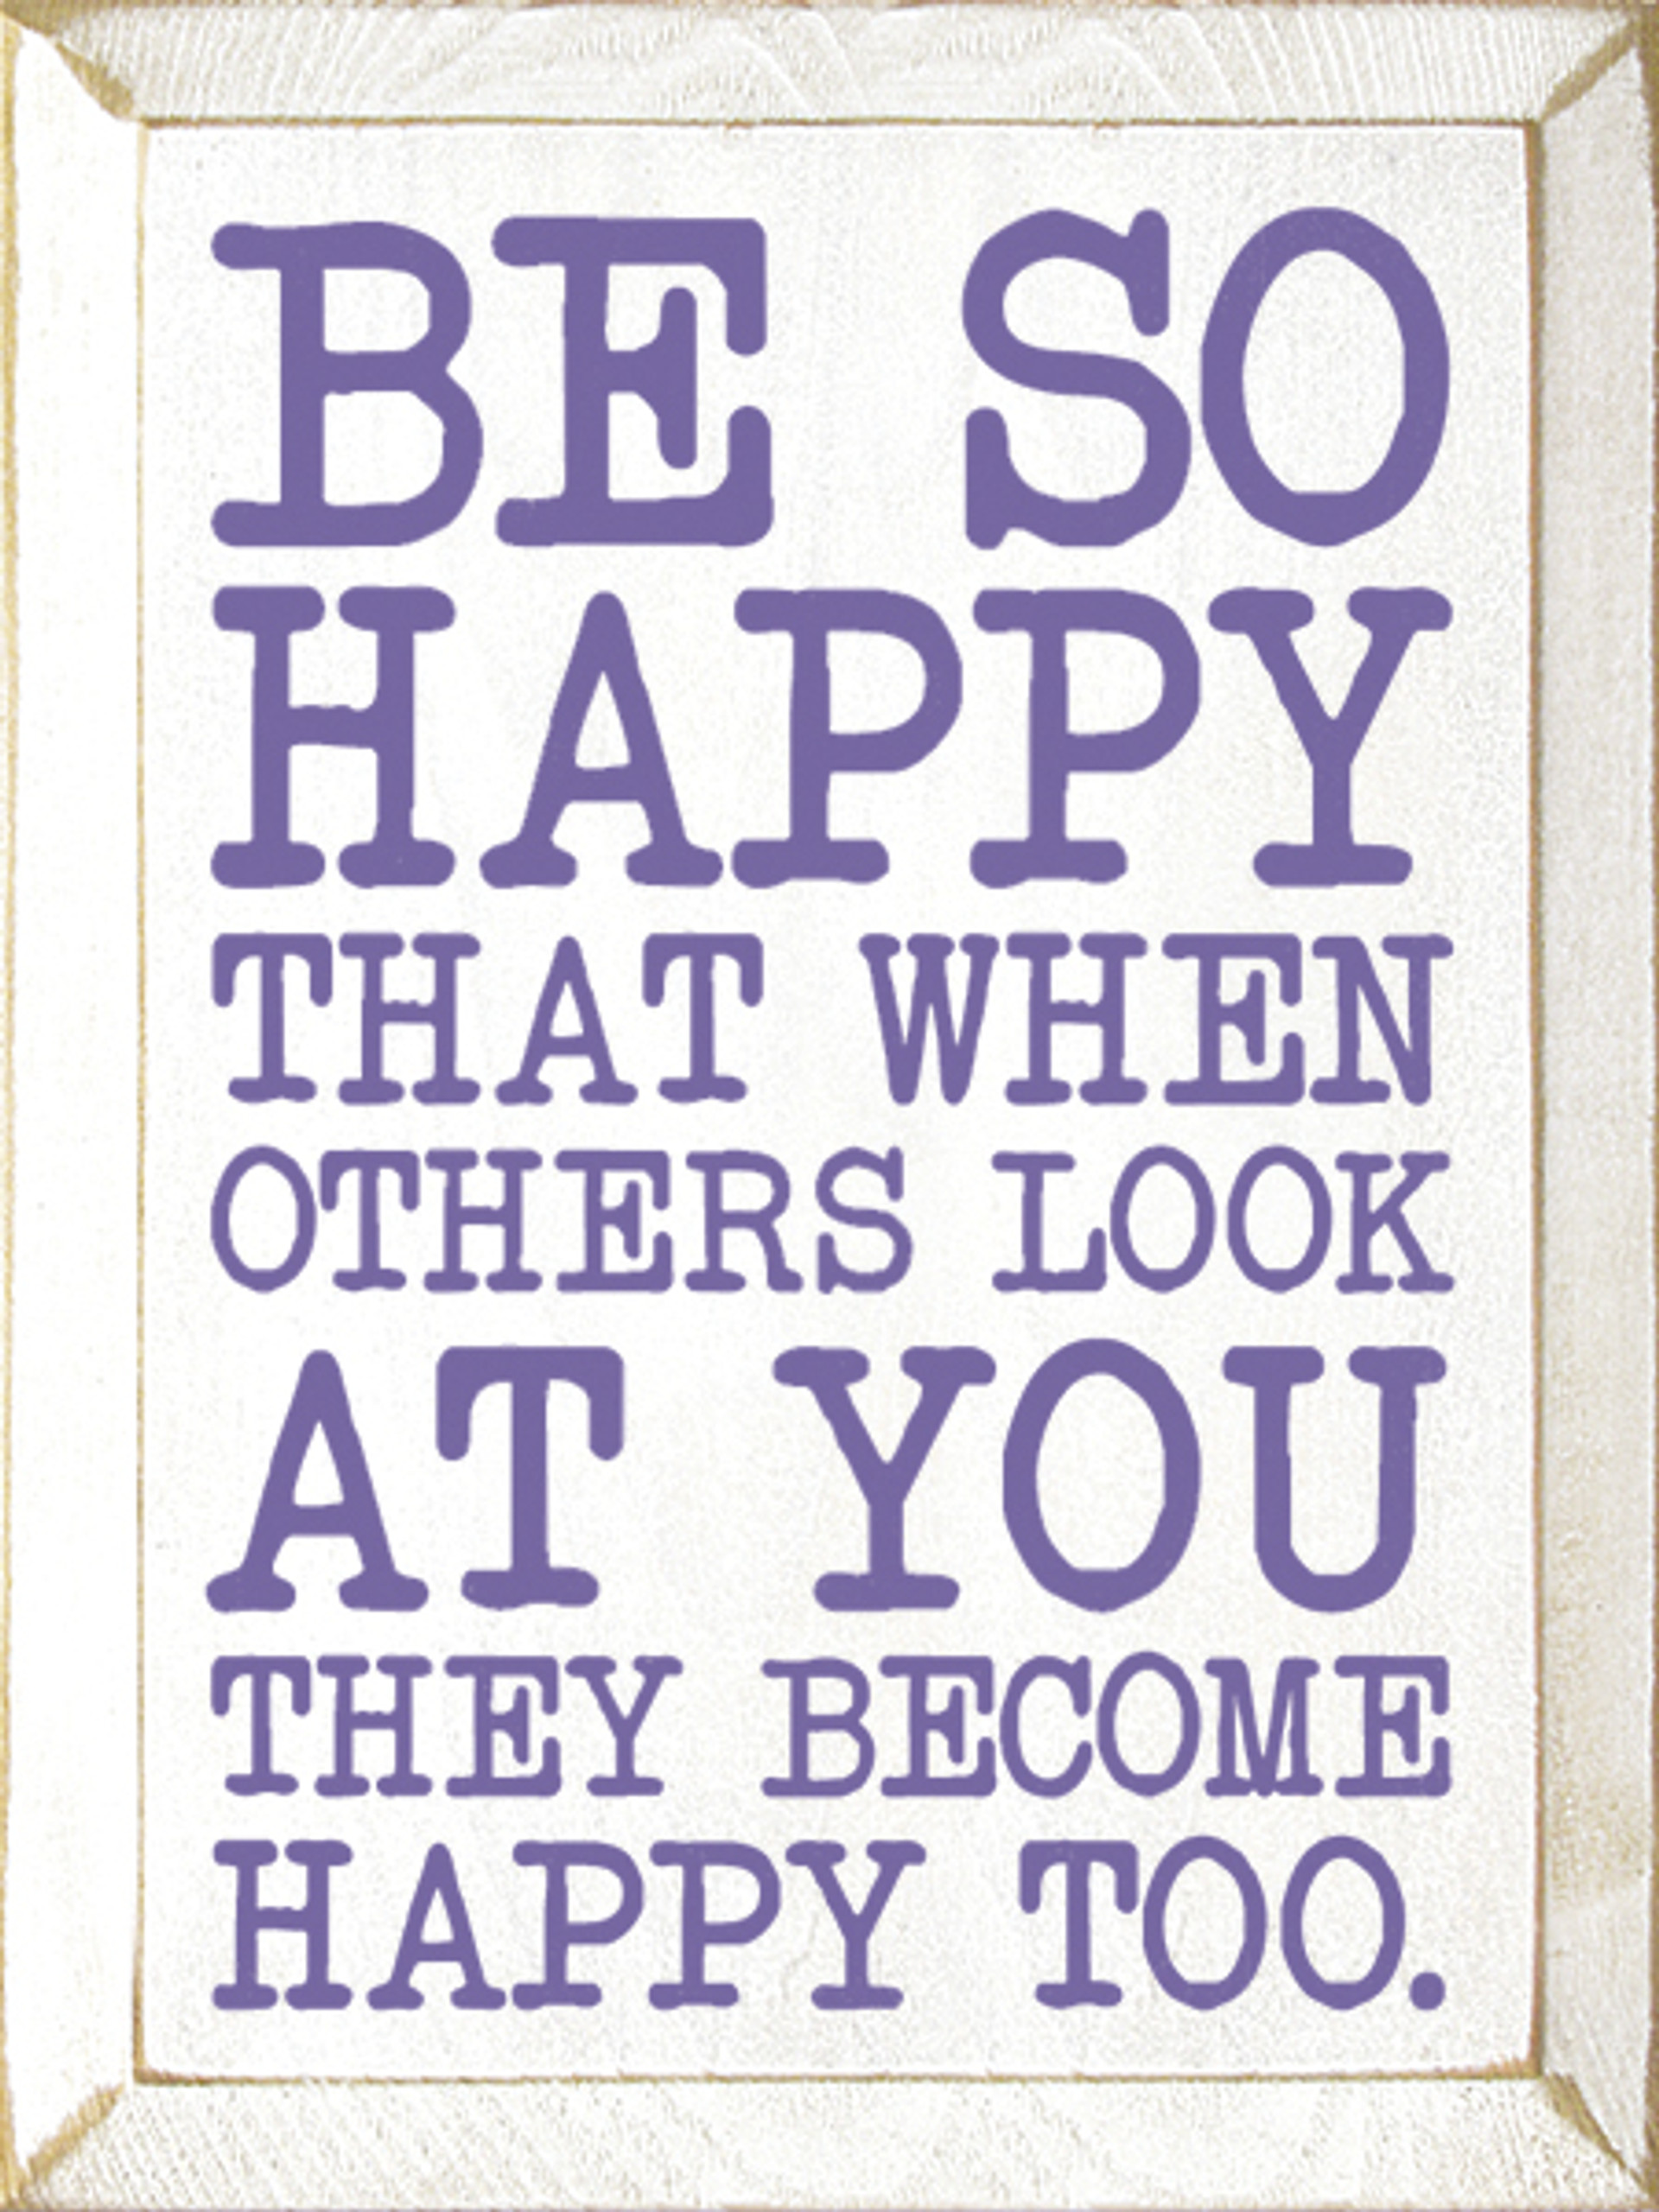 Be so happy that when others look at you they become happy too ...